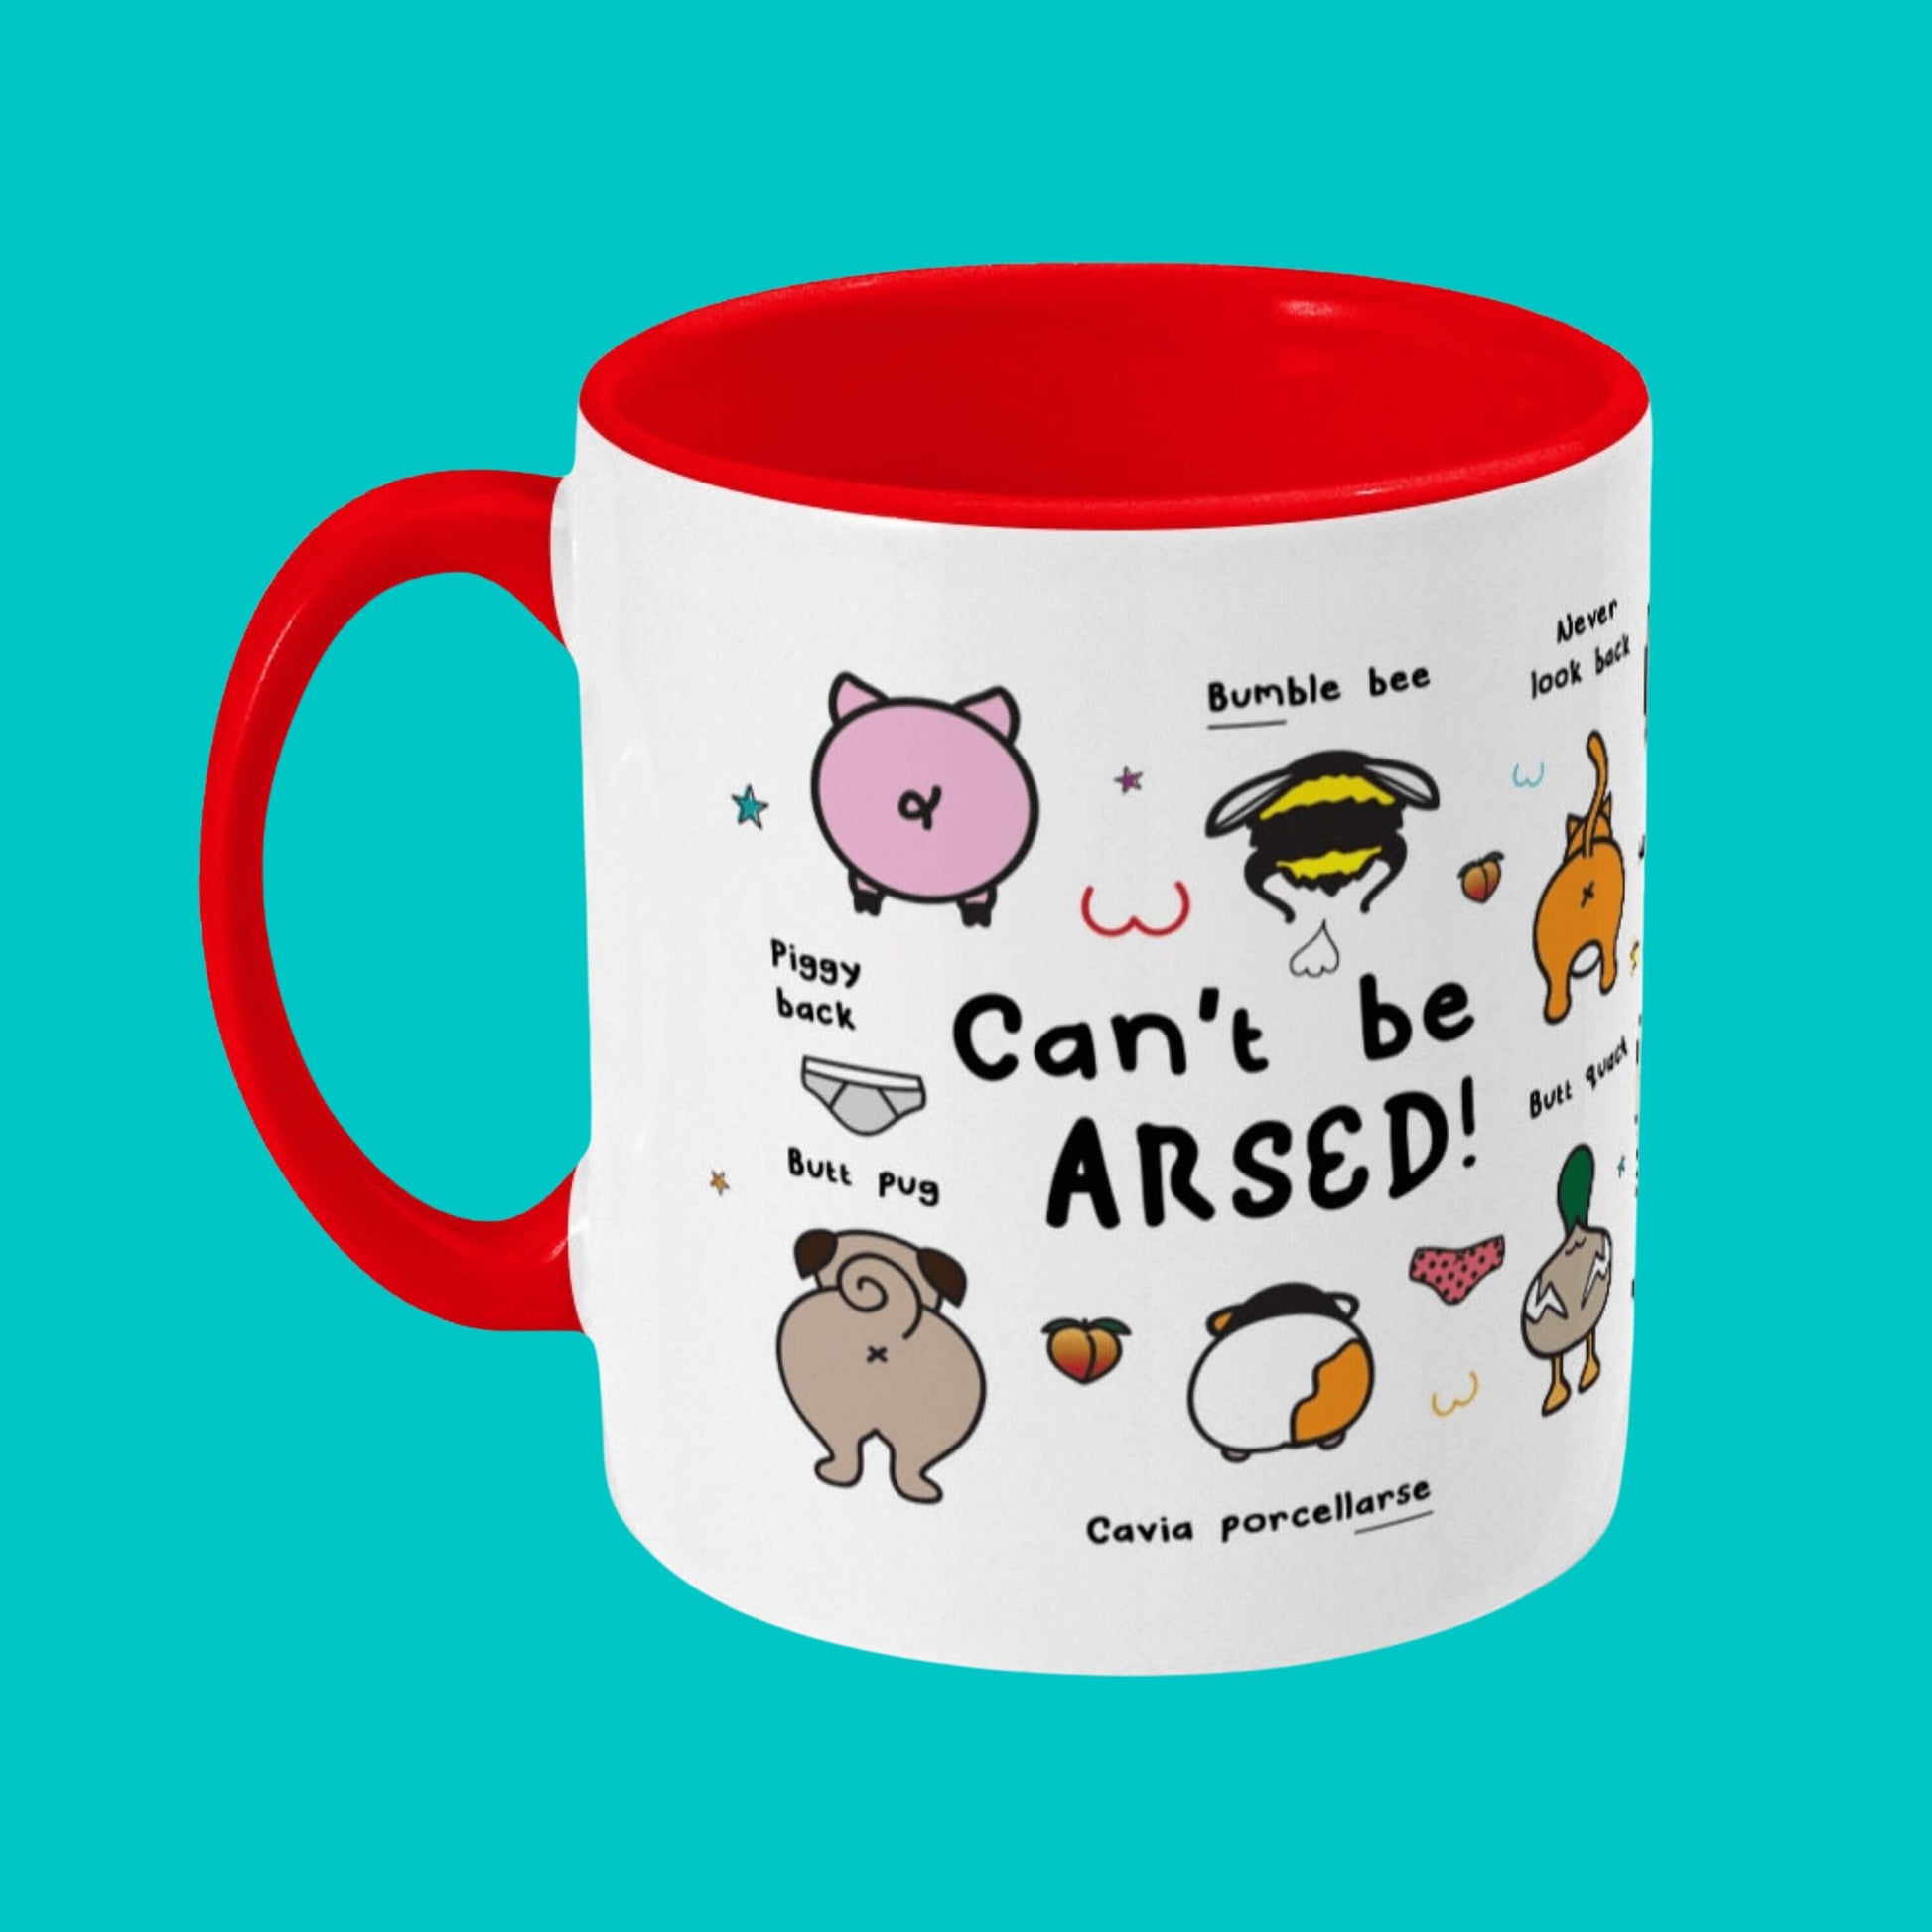 The Can't Be Arsed Mug on a blue background. The white mug with a red handle and inside features various animal bums with underwear, chest outlines, peaches and multicoloured stars. The mug is facing right which shows pig - piggy back, bumble bee - bum ble bee, pug - butt pug, guinea pig - cavia porcellarse, duck - butt quack and cat - never look back, bums.